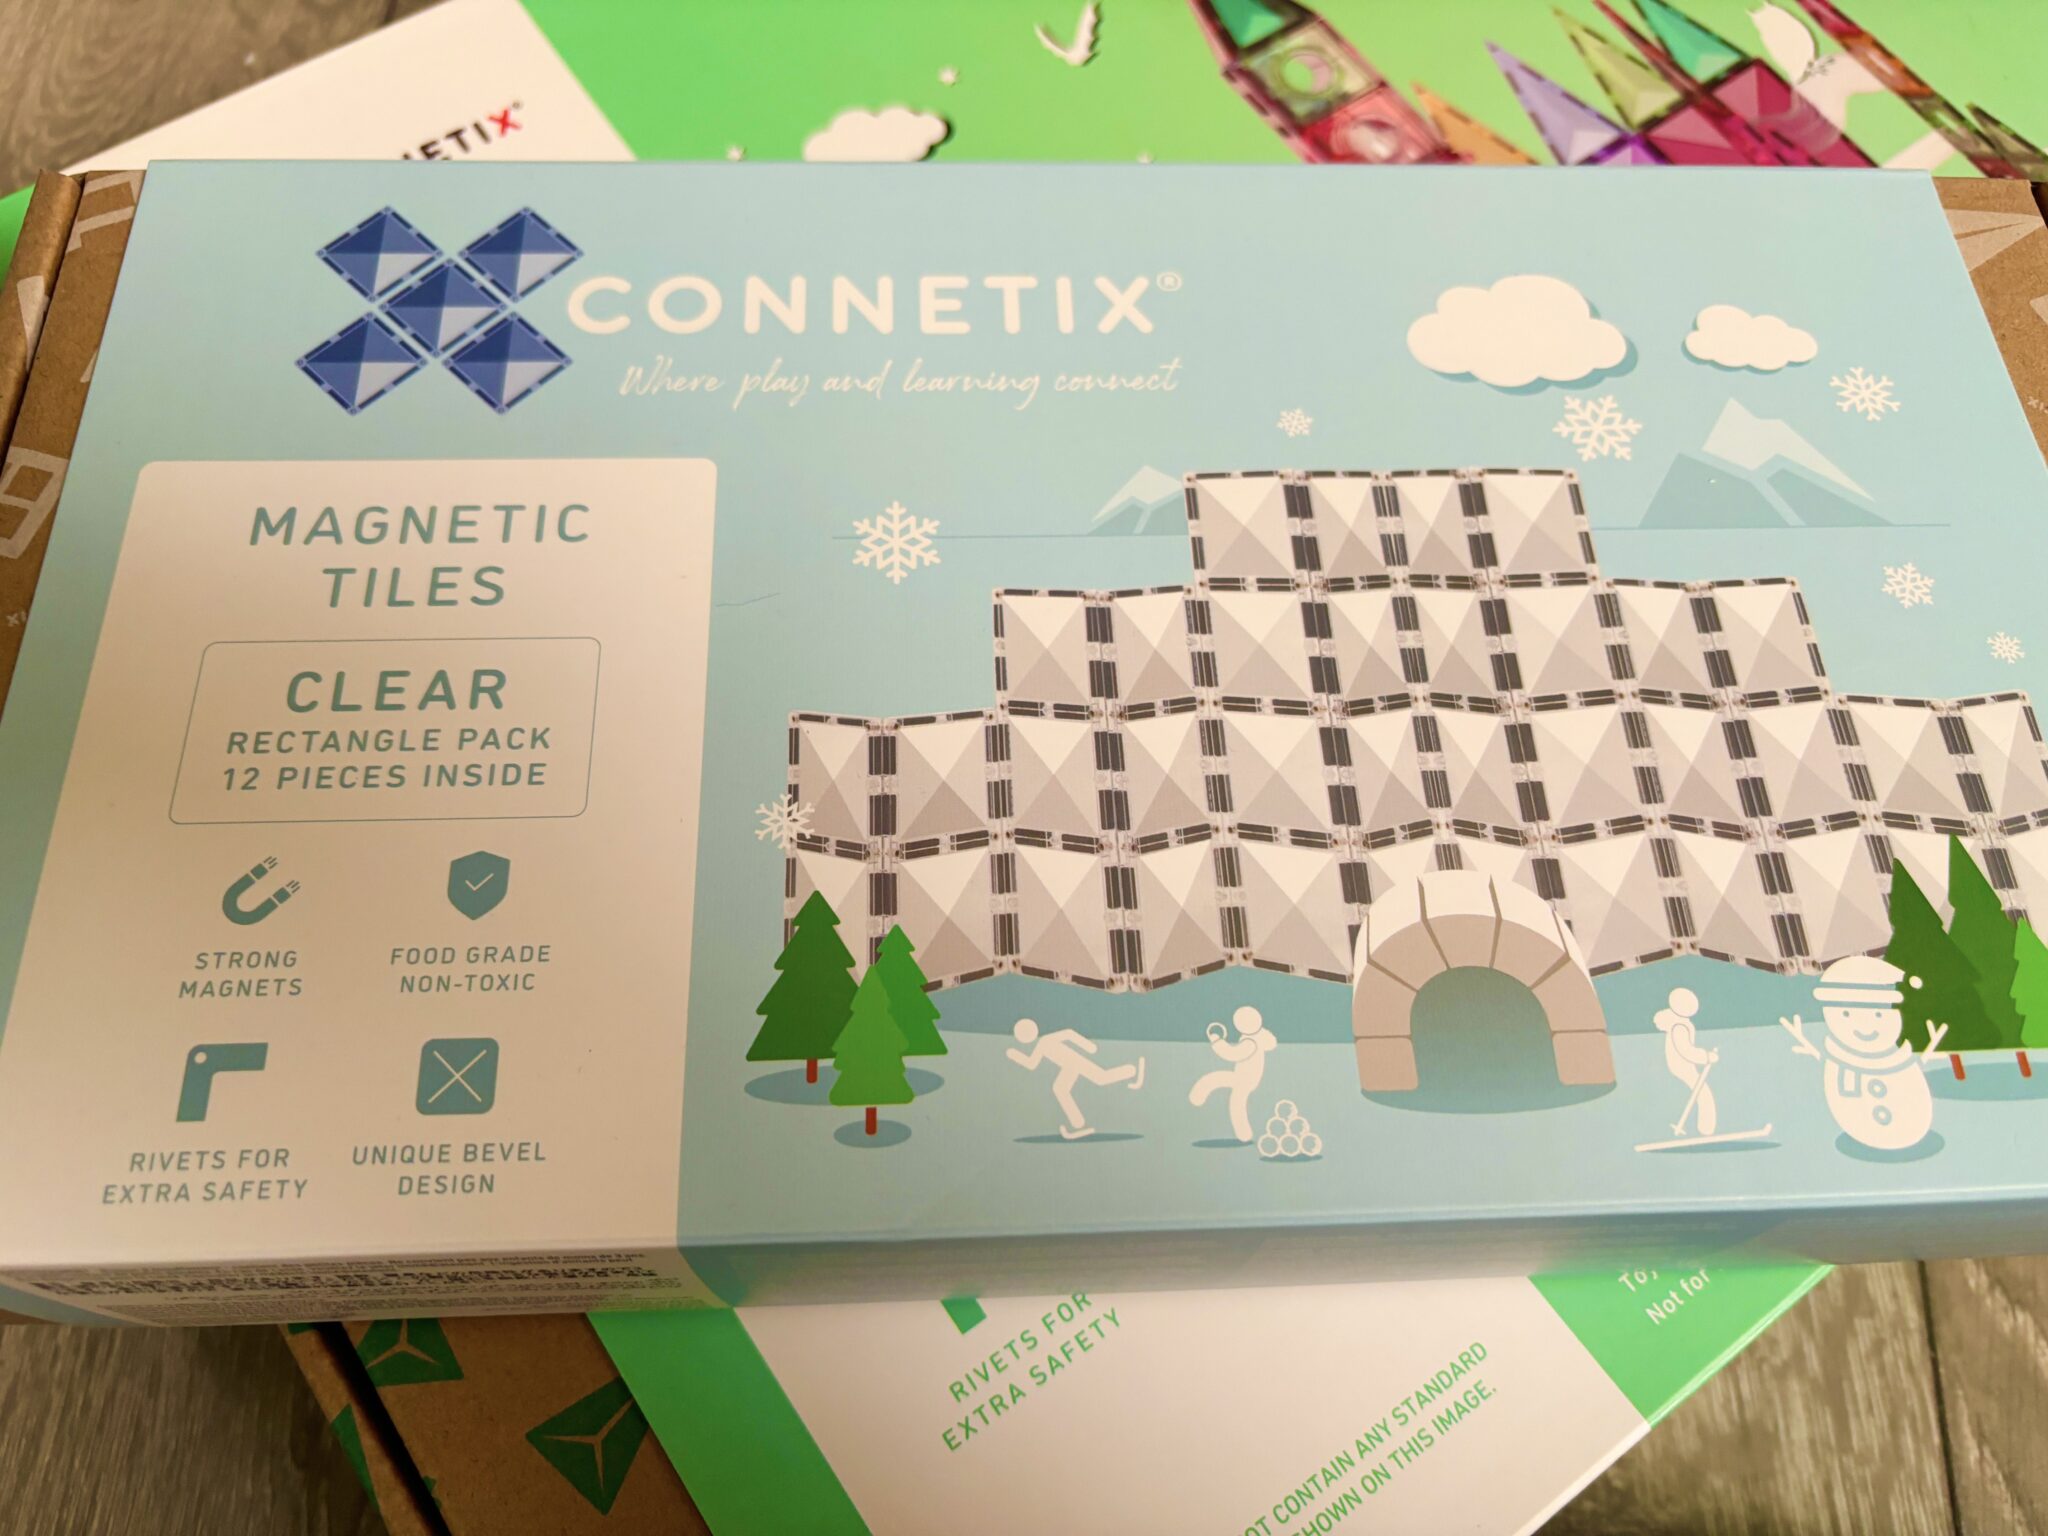 A box of connetix magnetic tiles on a table.